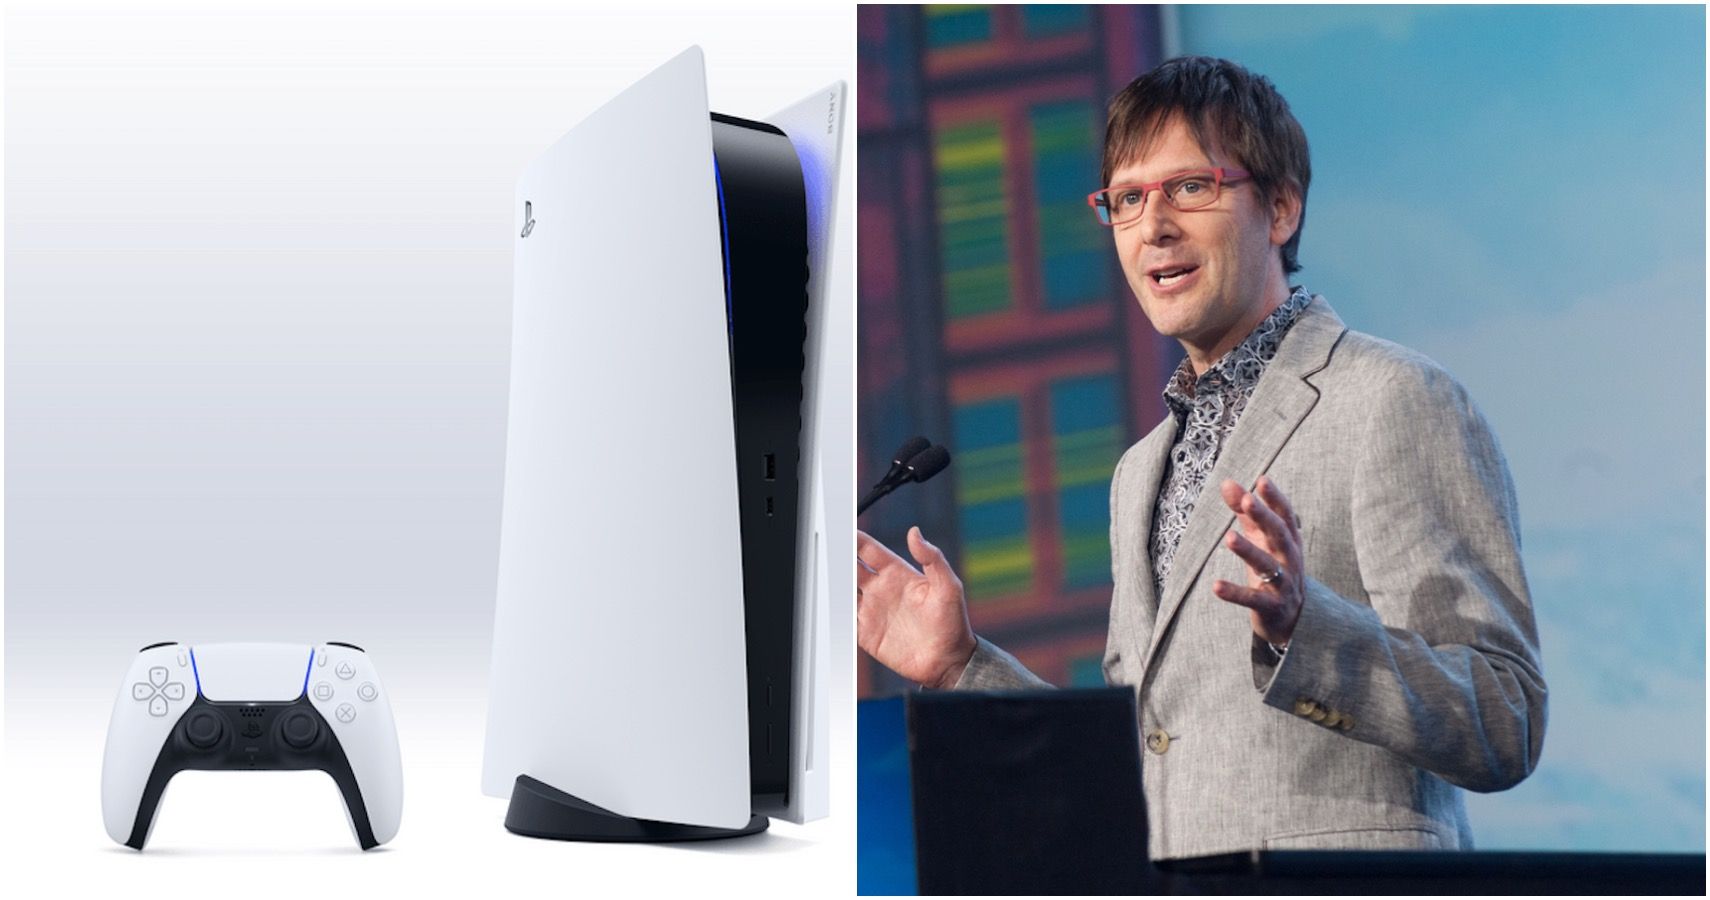 PS5 and mark cerny split image